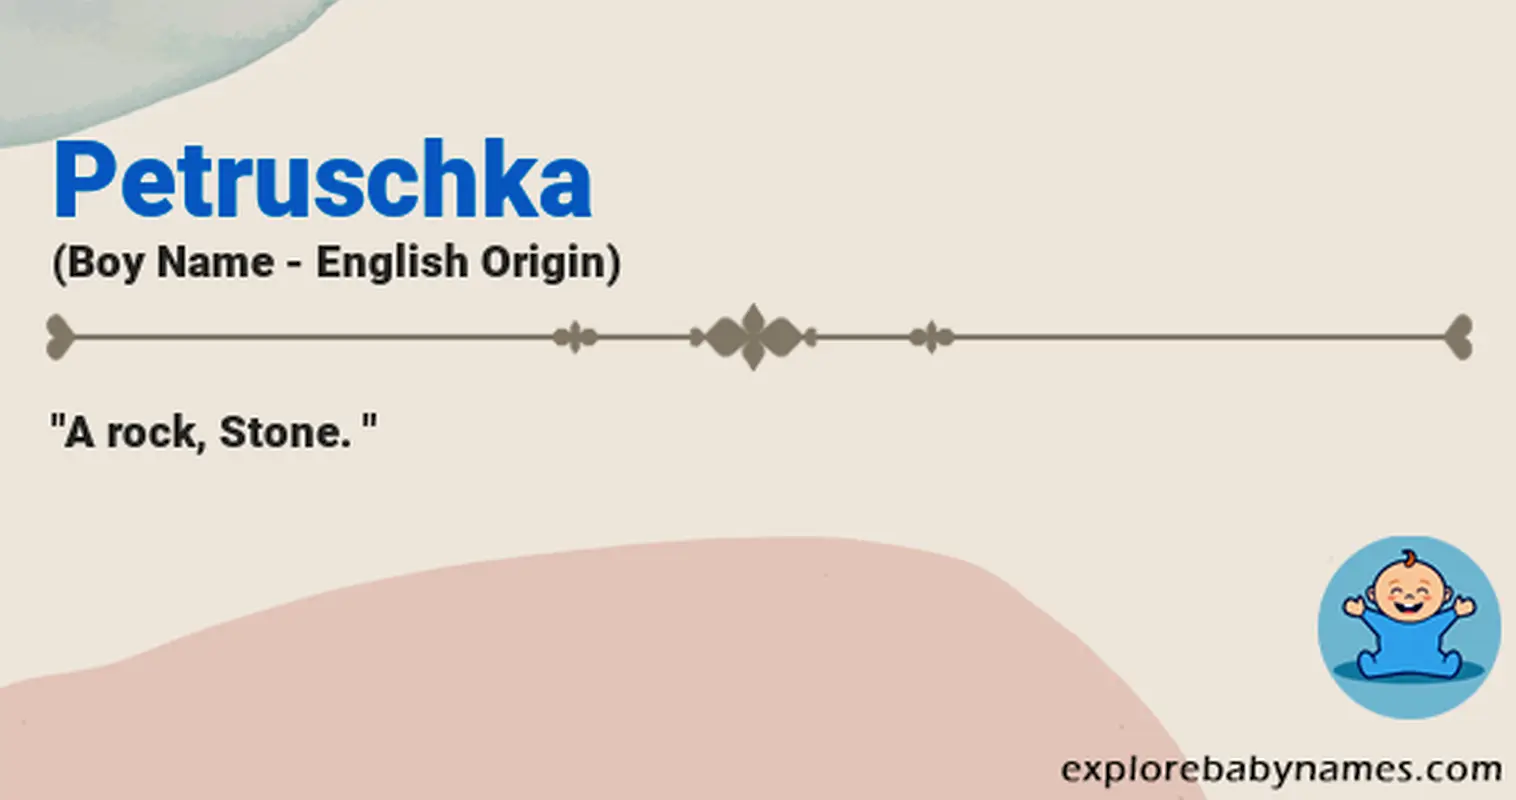 Meaning of Petruschka